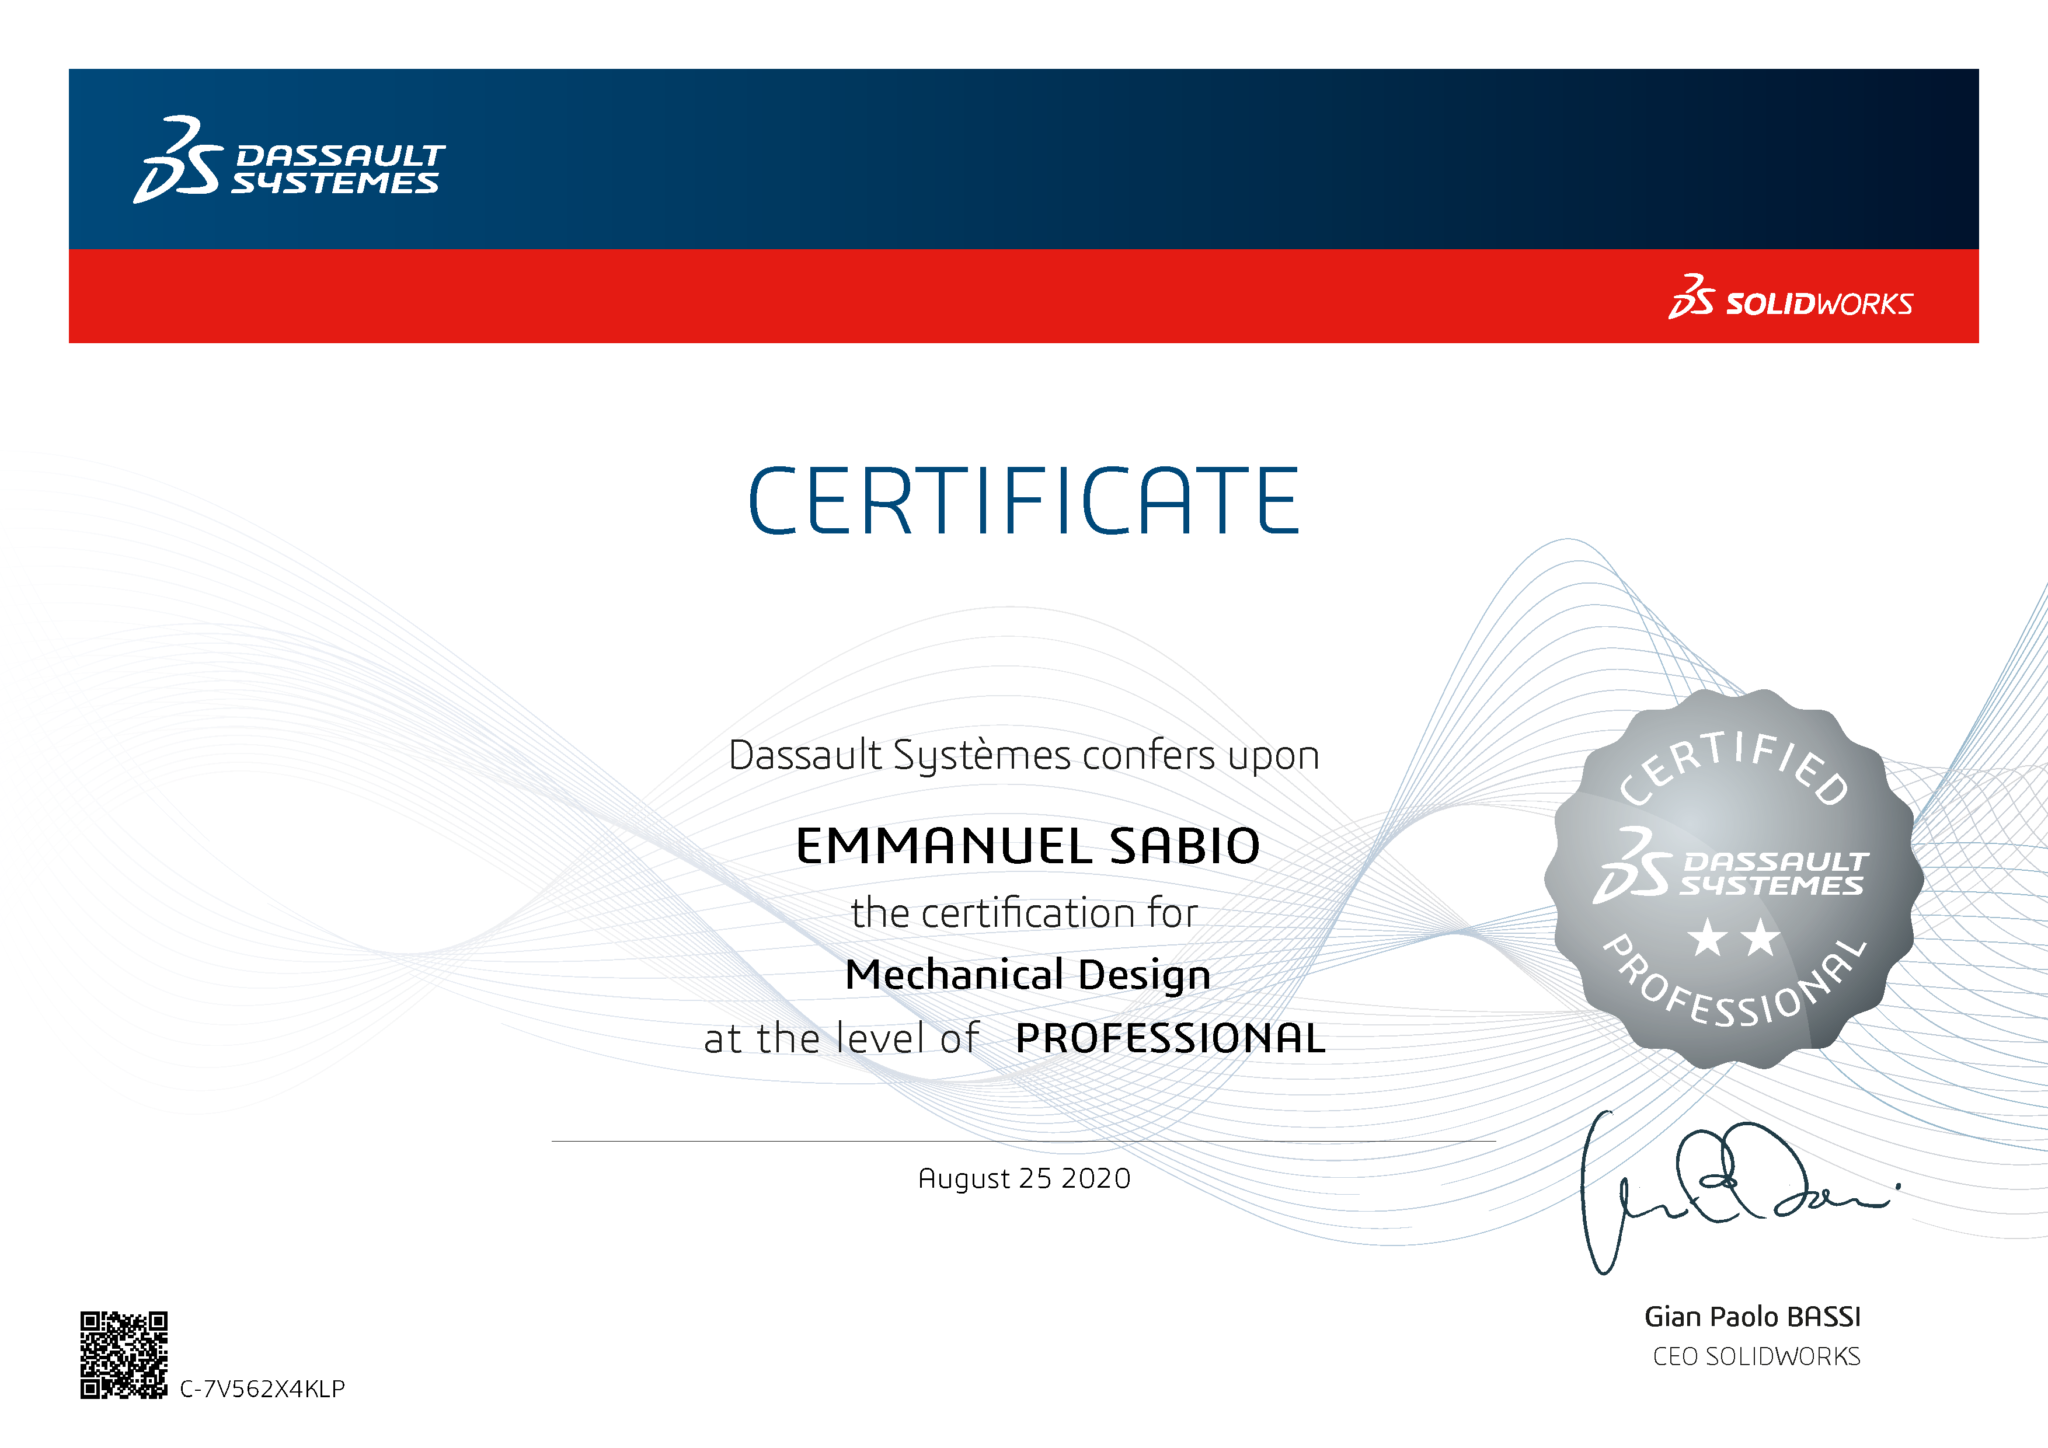 how long do solidworks certifications last